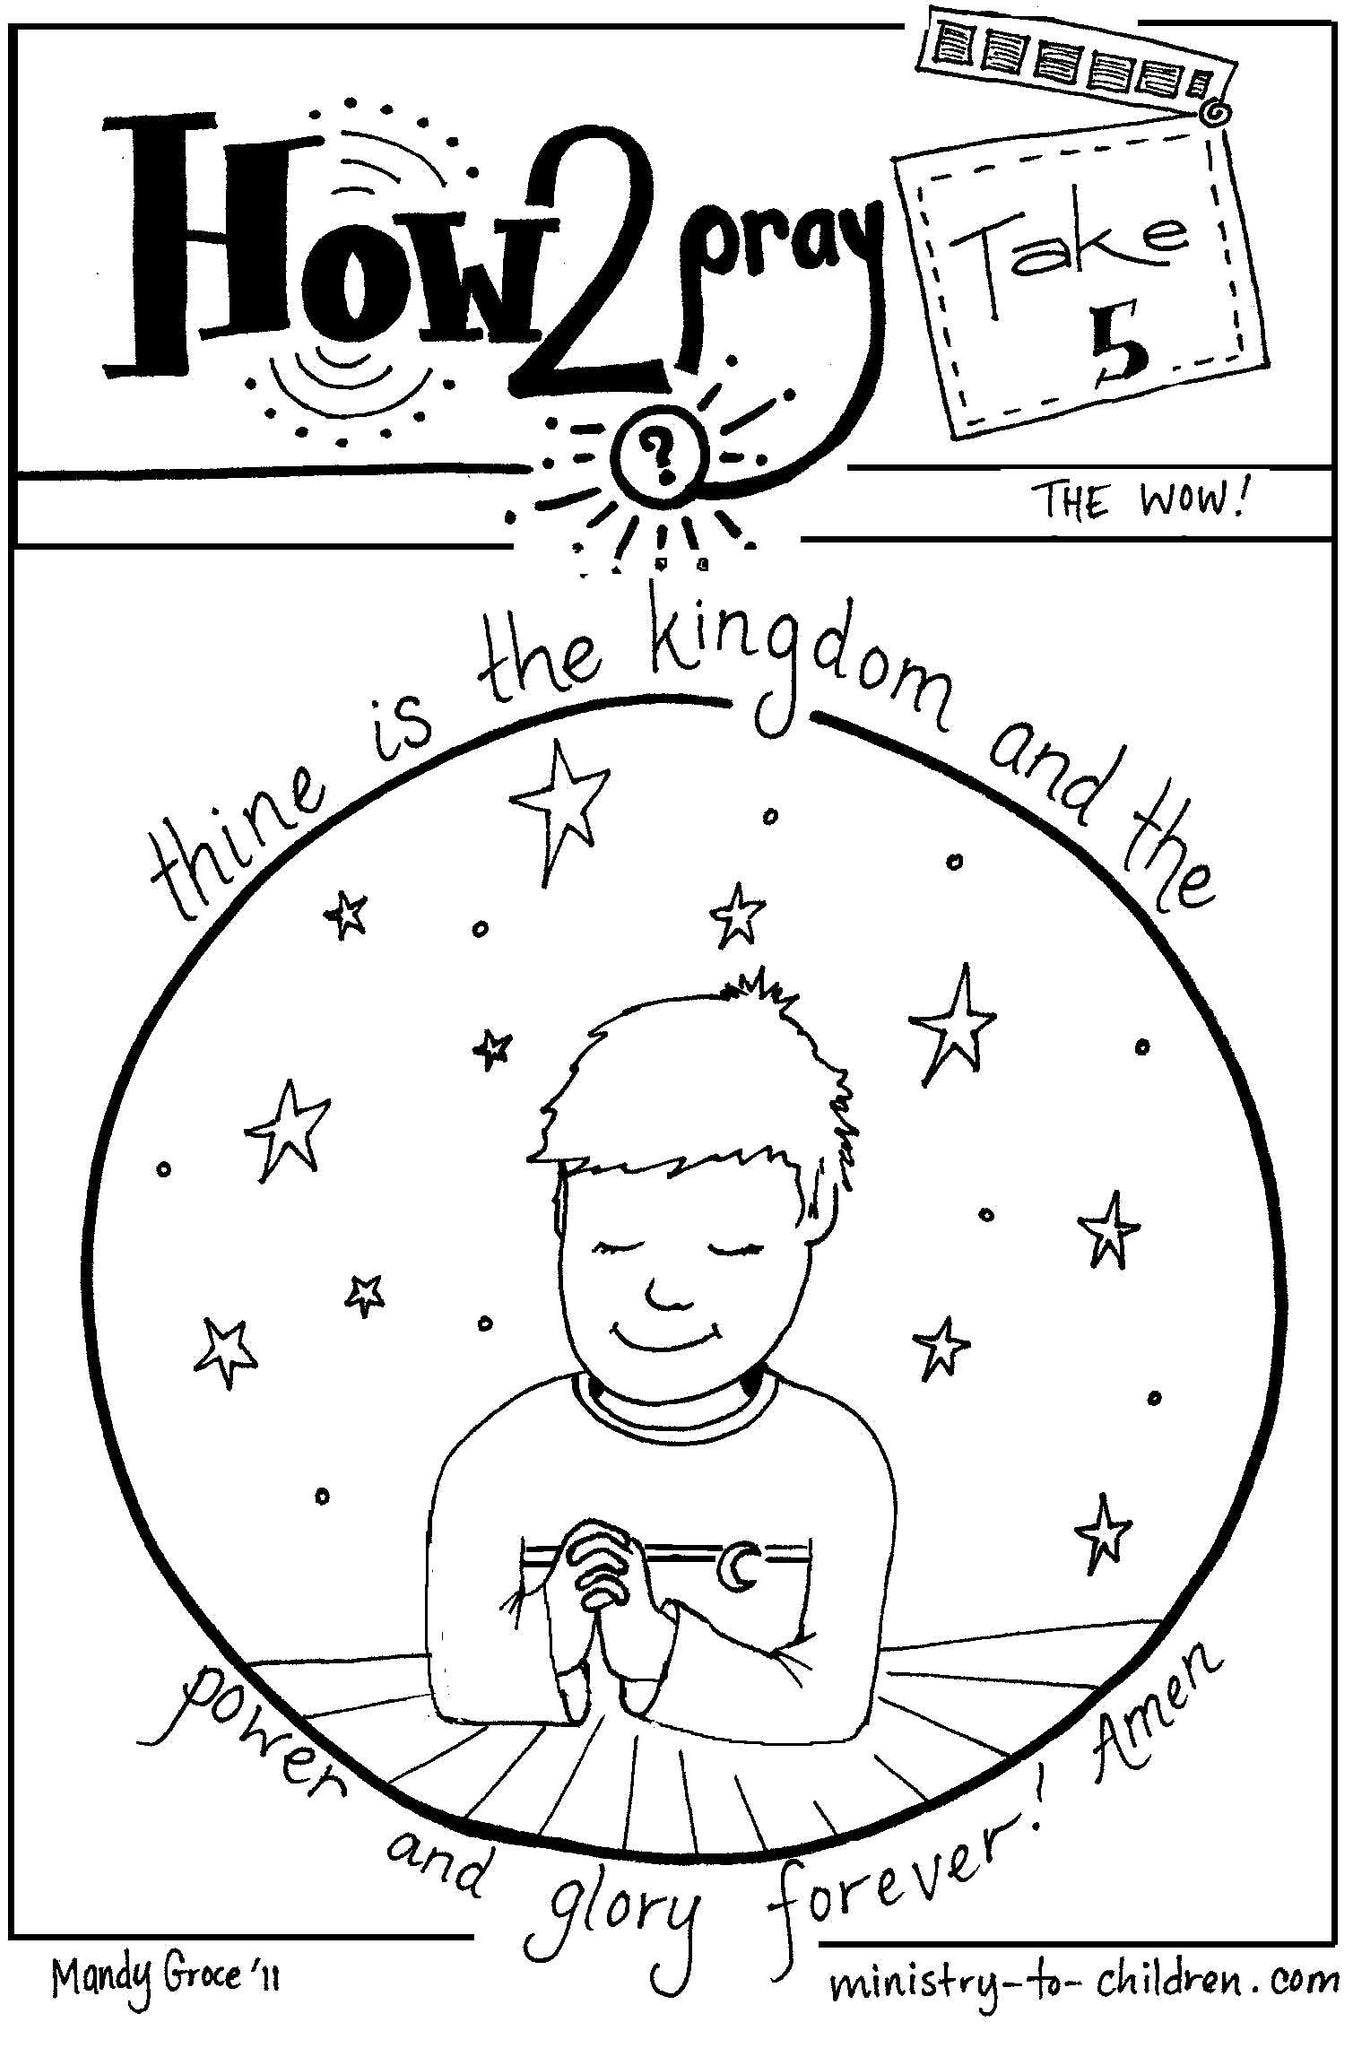 the lords prayer coloring book for kids free 5 pages download only